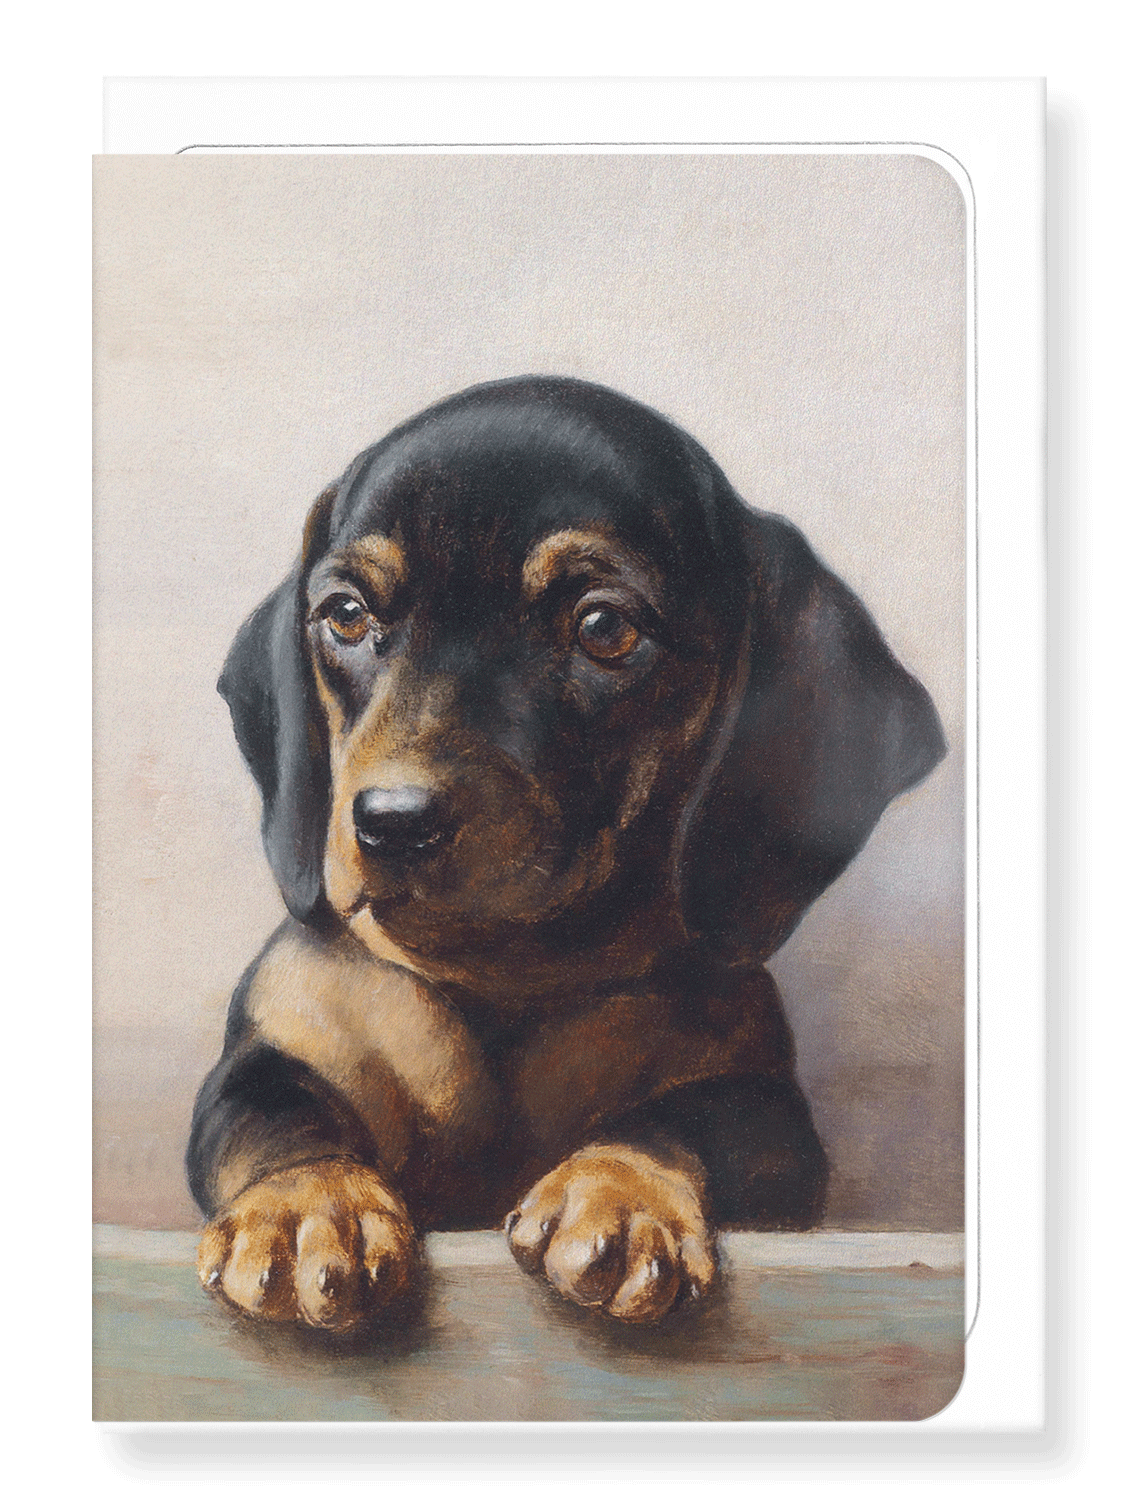 Ezen Designs - Young dachshund - Greeting Card - Front